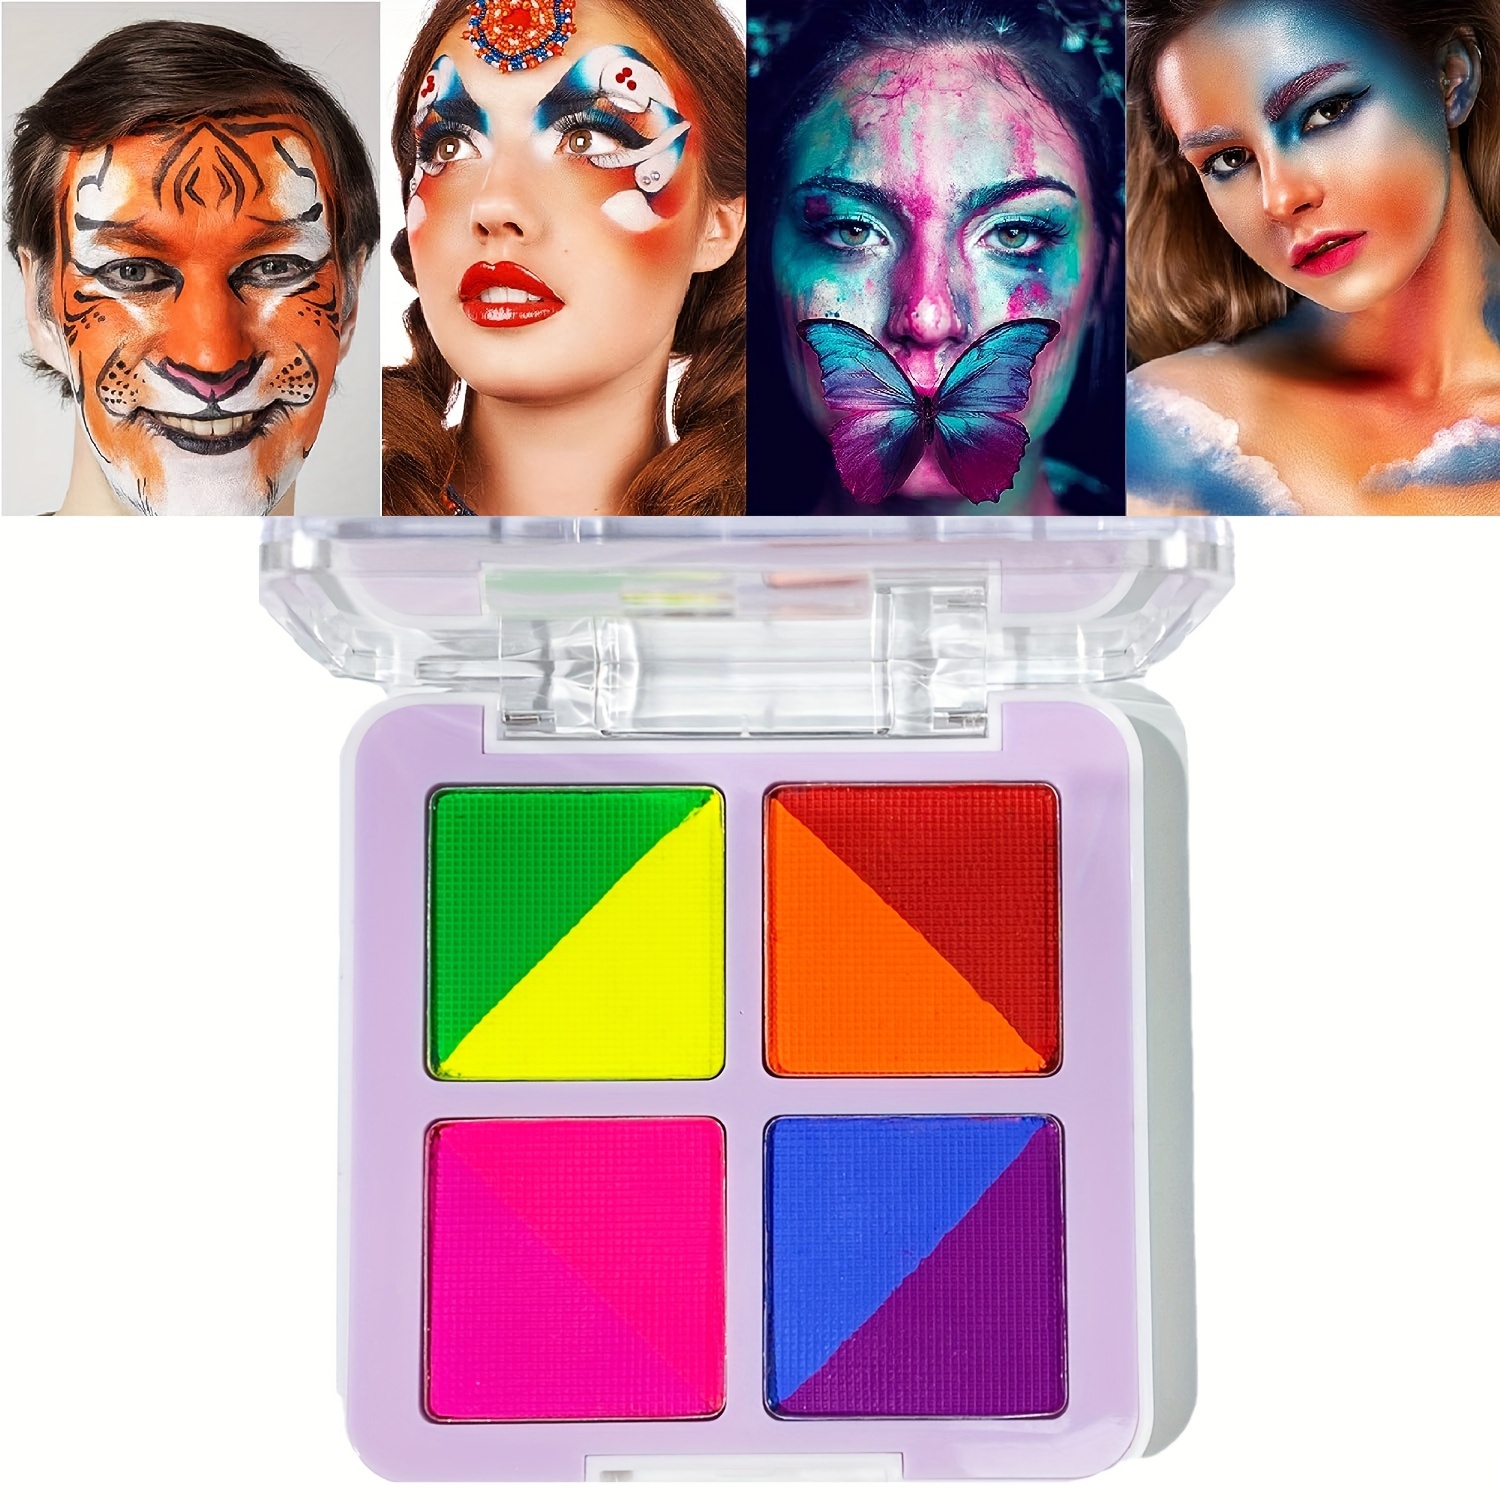 Athena Face painting palette! Oil based creamy paints for non